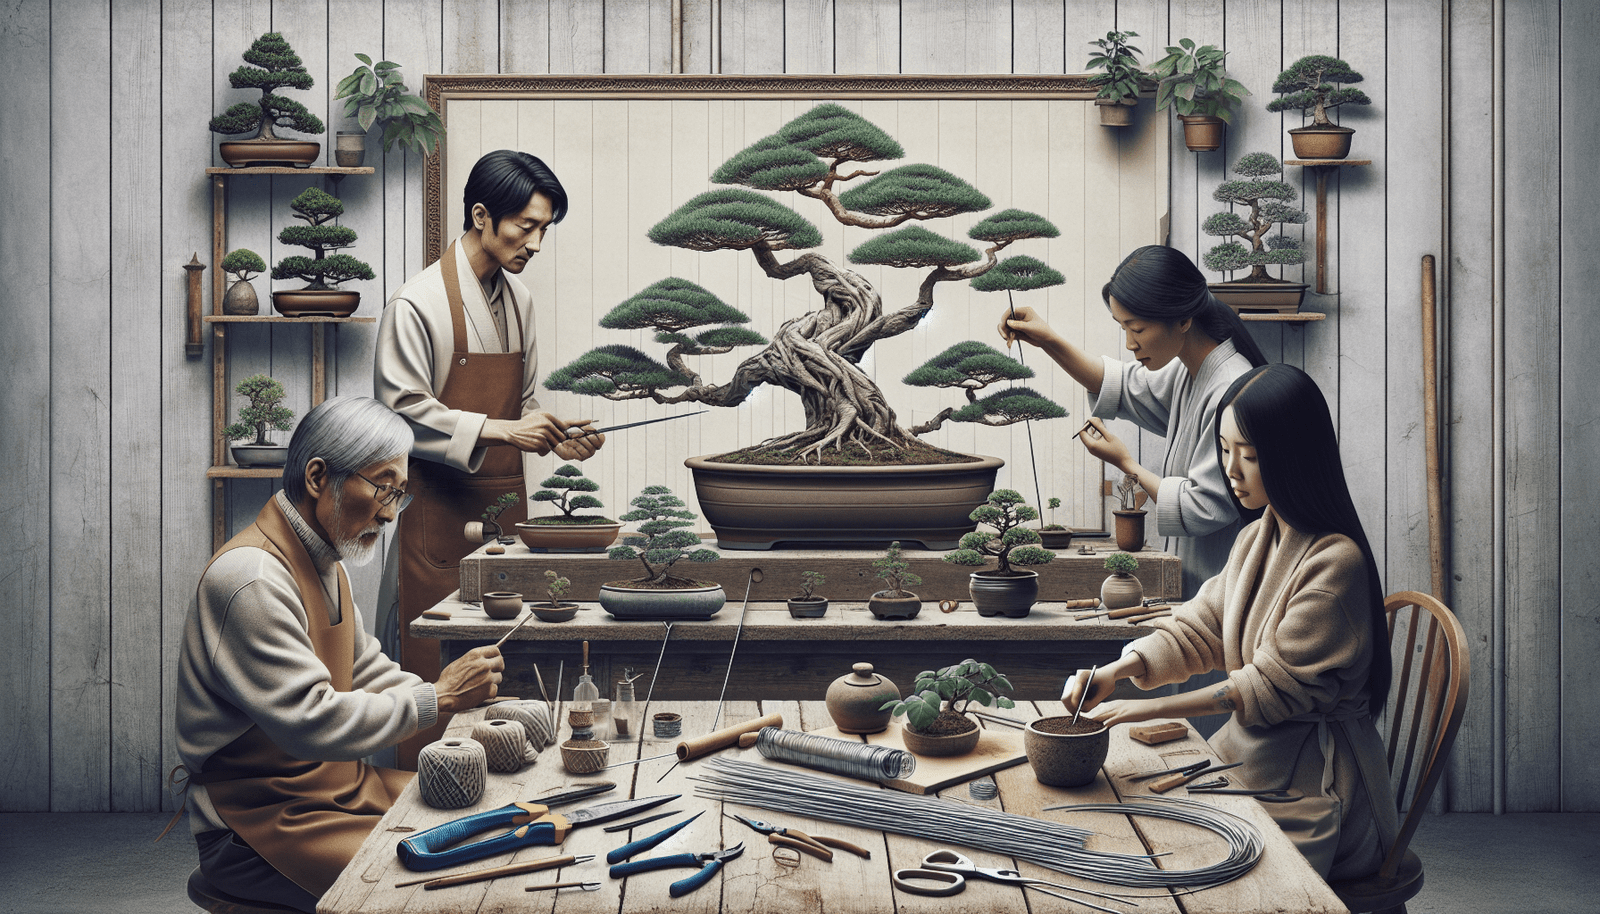 The Art Of Bonsai: Cultivating Miniature Trees